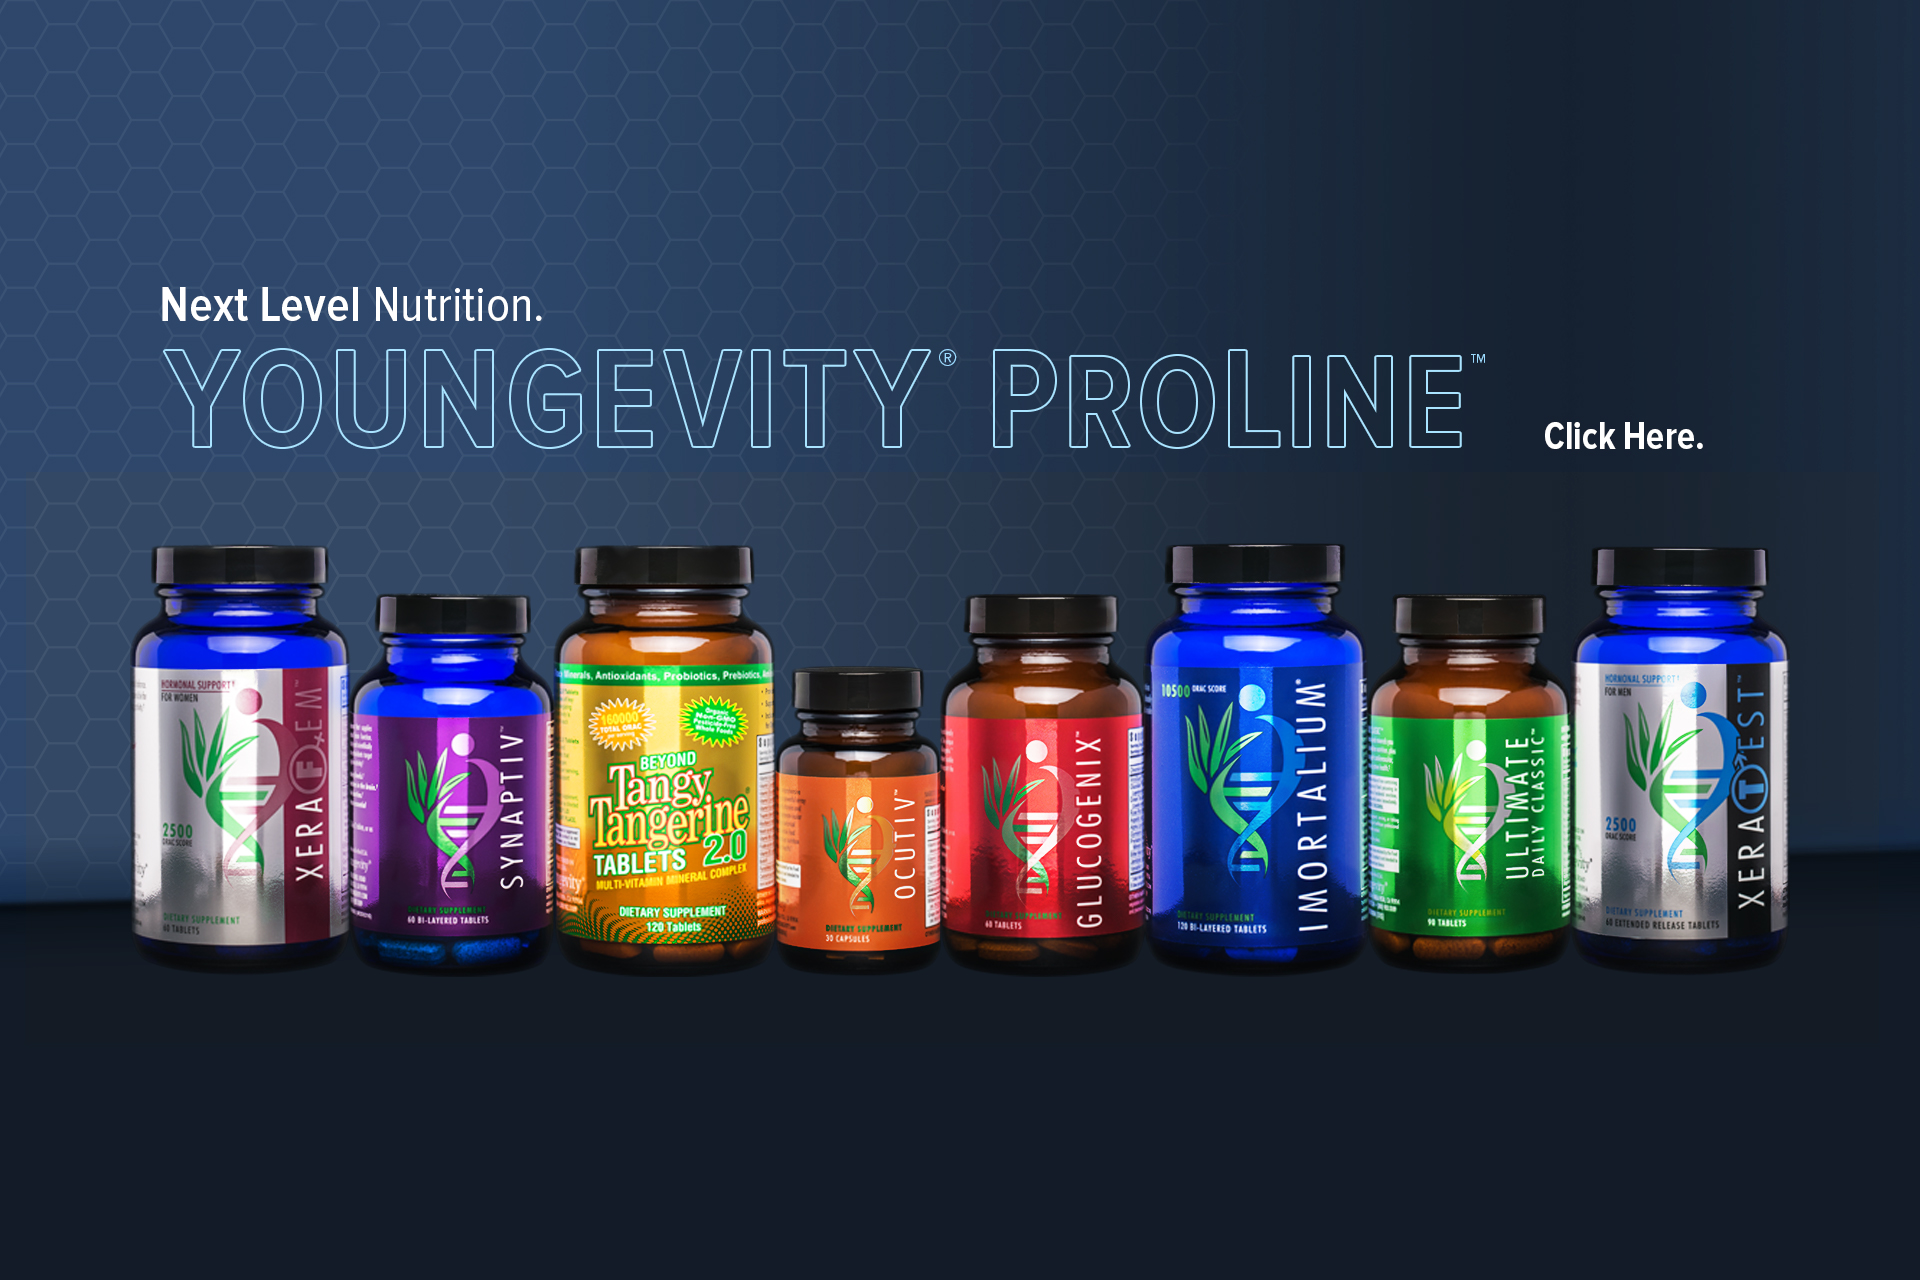 YGY Pro Range | Youngevity 90-for-life